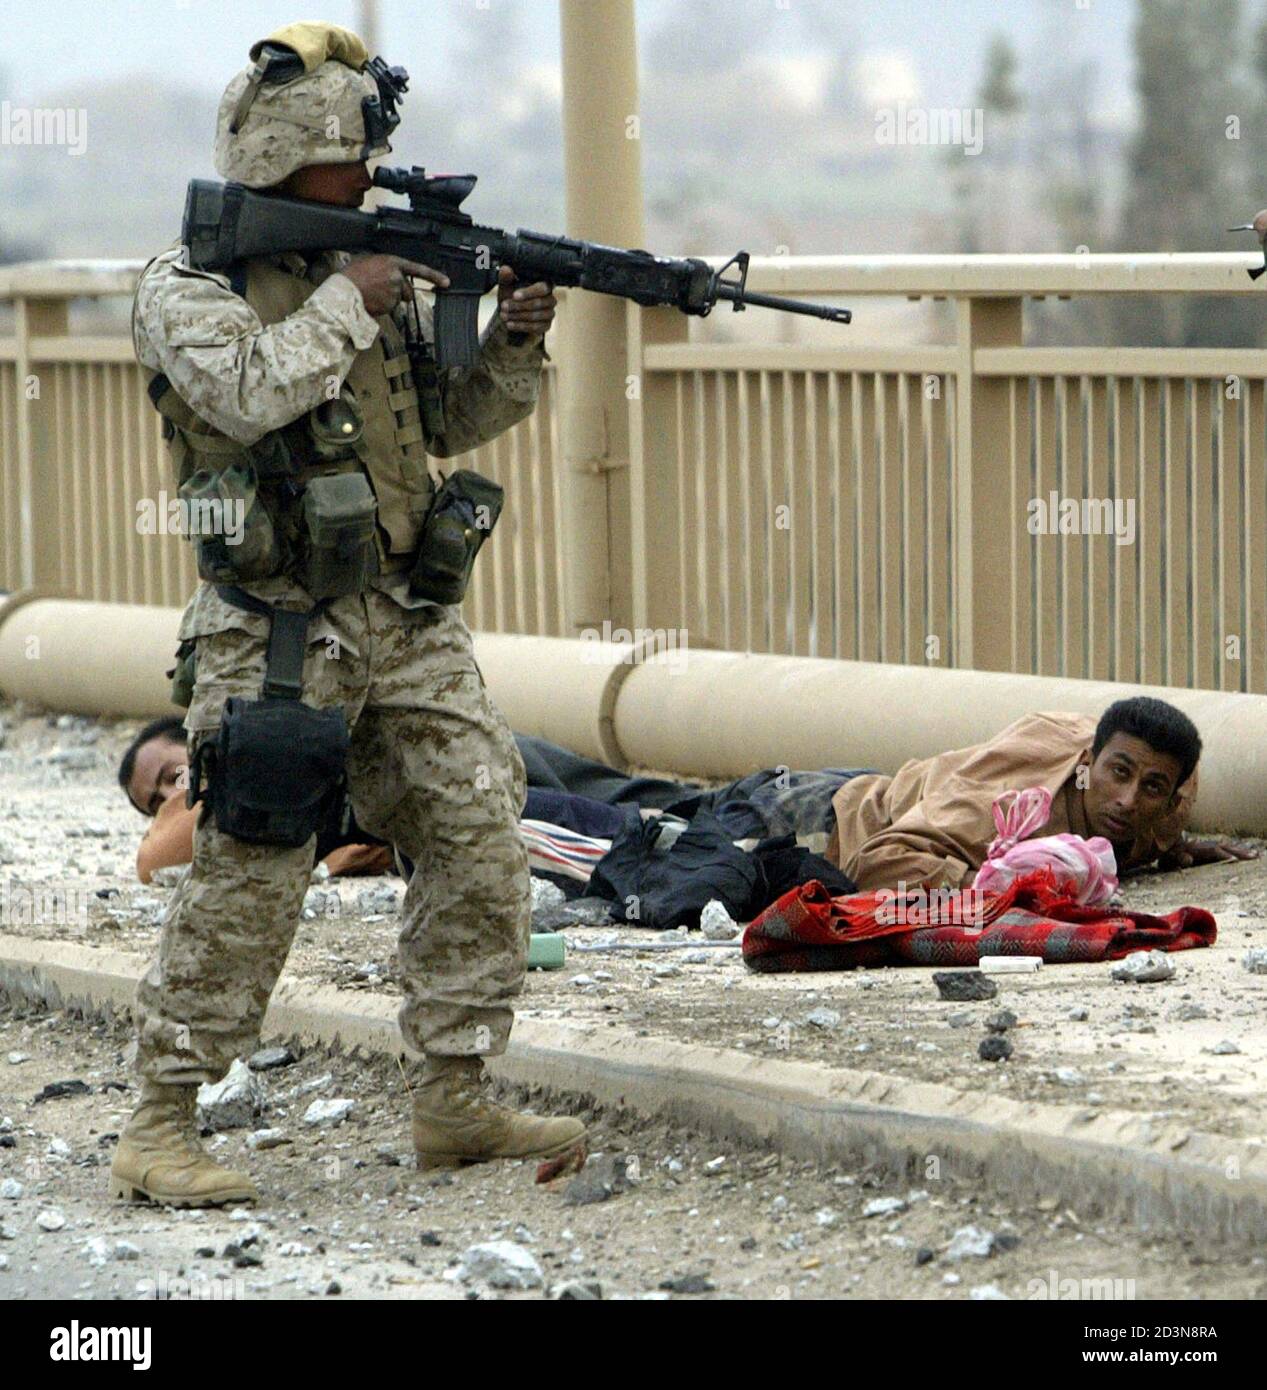 A U.S. Marine from Lima Company, a part of the 7th Marine Regiment, keeps two members of the Iraqi Republican guard dressed in civilian clothes on the ground on the New Baghdad highway bridge in the suburbs of the Iraqi capital Baghdad on April 7, 2003.  [U.S. forces burst into the heart of Baghdad on Monday and entered two palace complexes of President Saddam Hussein, but they said the operation was an armoured raid not intended to hold territory.] Stock Photo